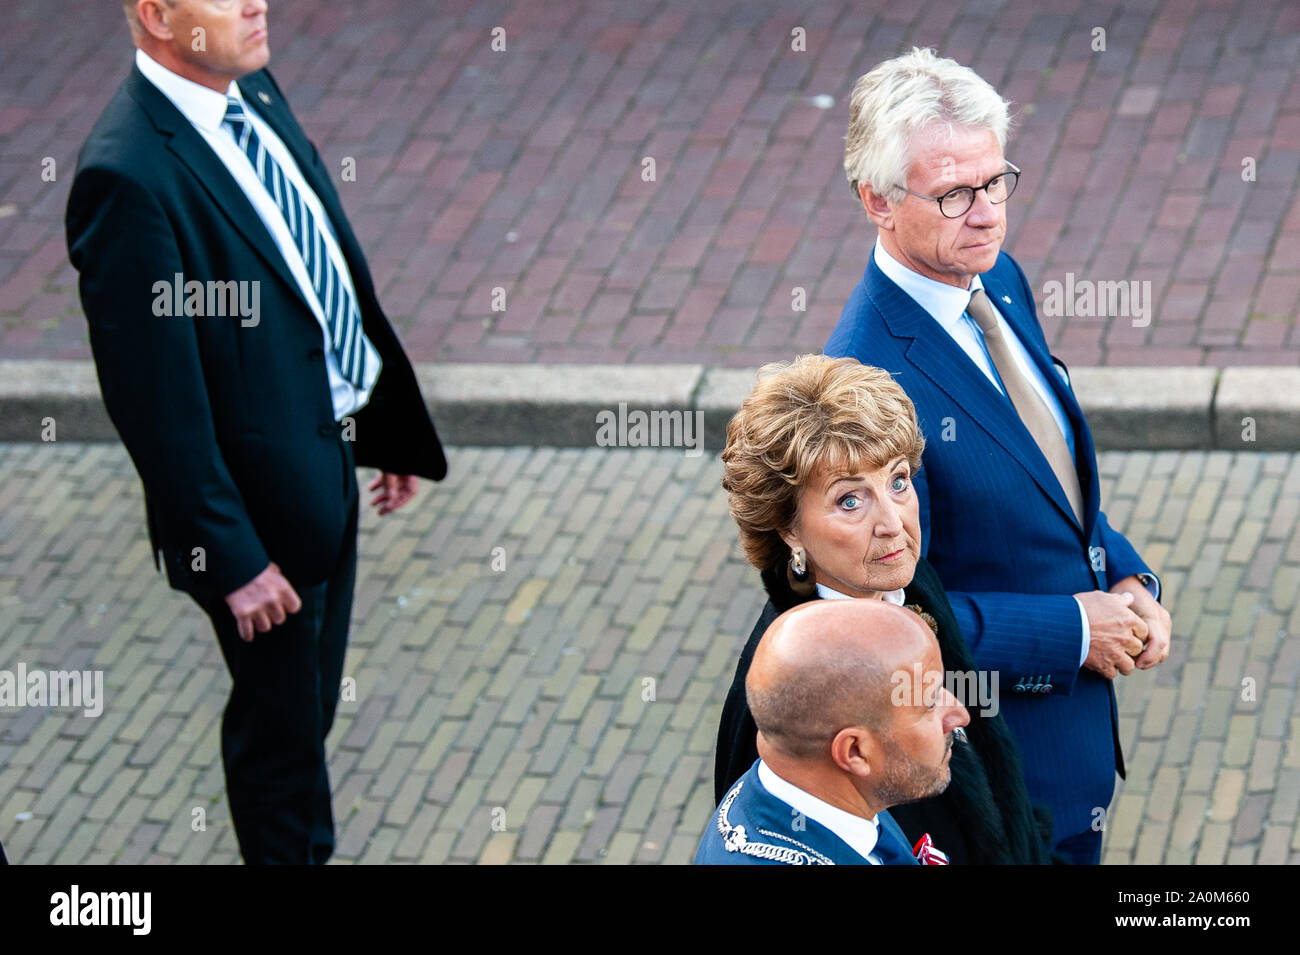 Princess Margriet of the Netherlands and Mayor of Arnhem, Ahmed Marcouch arrive at the ceremony.During the Airborne ceremony with an international contribution at the Airborne Square at the foot of the John Frost Bridge in Arnhem, all Allied soldiers are commemorated, who fell in battle whilst trying to conquer and hold the Arnhem bridge (John Frost bridge) on the 17-23 September 1944. British and Polish veterans, as well as military and civilian officials, pay their respect to those who gave their lives for freedom by laying wreaths. The 75th anniversary of the Battle of Arnhem ceremony also Stock Photo